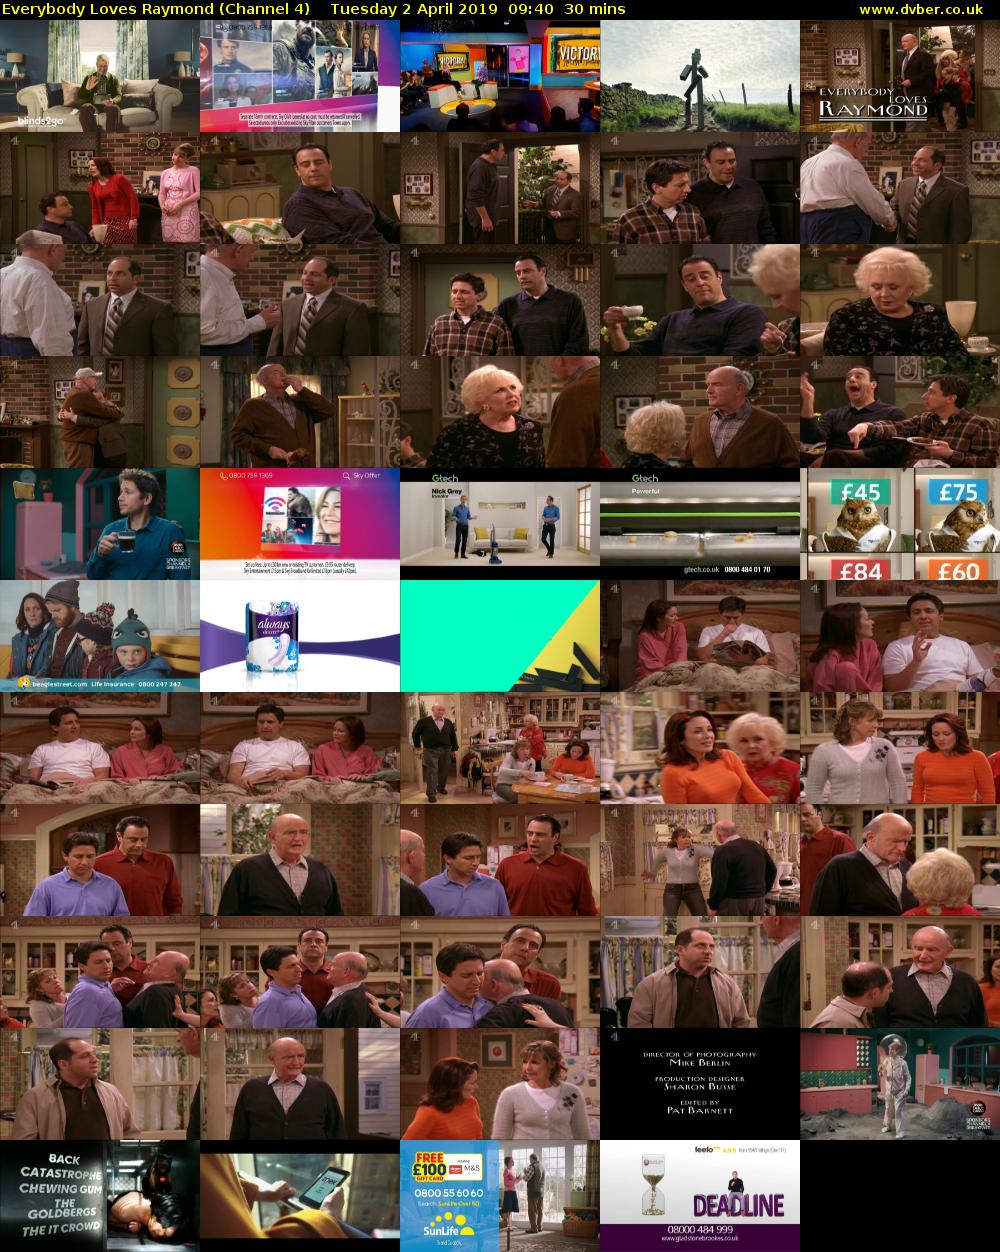 Everybody Loves Raymond (Channel 4) Tuesday 2 April 2019 09:40 - 10:10